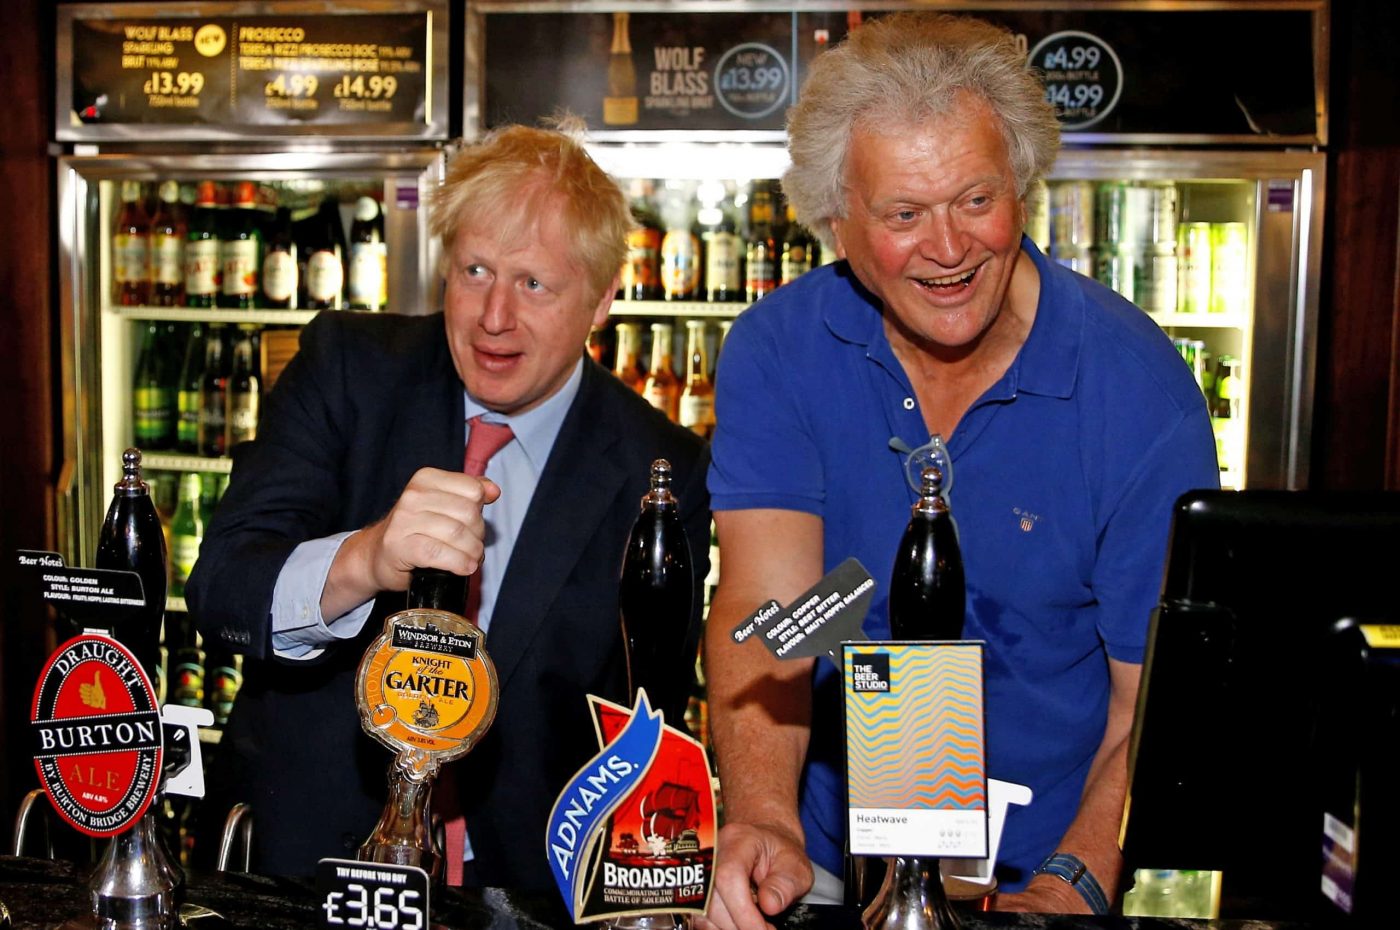 Wetherspoons staff: Tim Martin’s behaviour ‘absolutely outrageous’